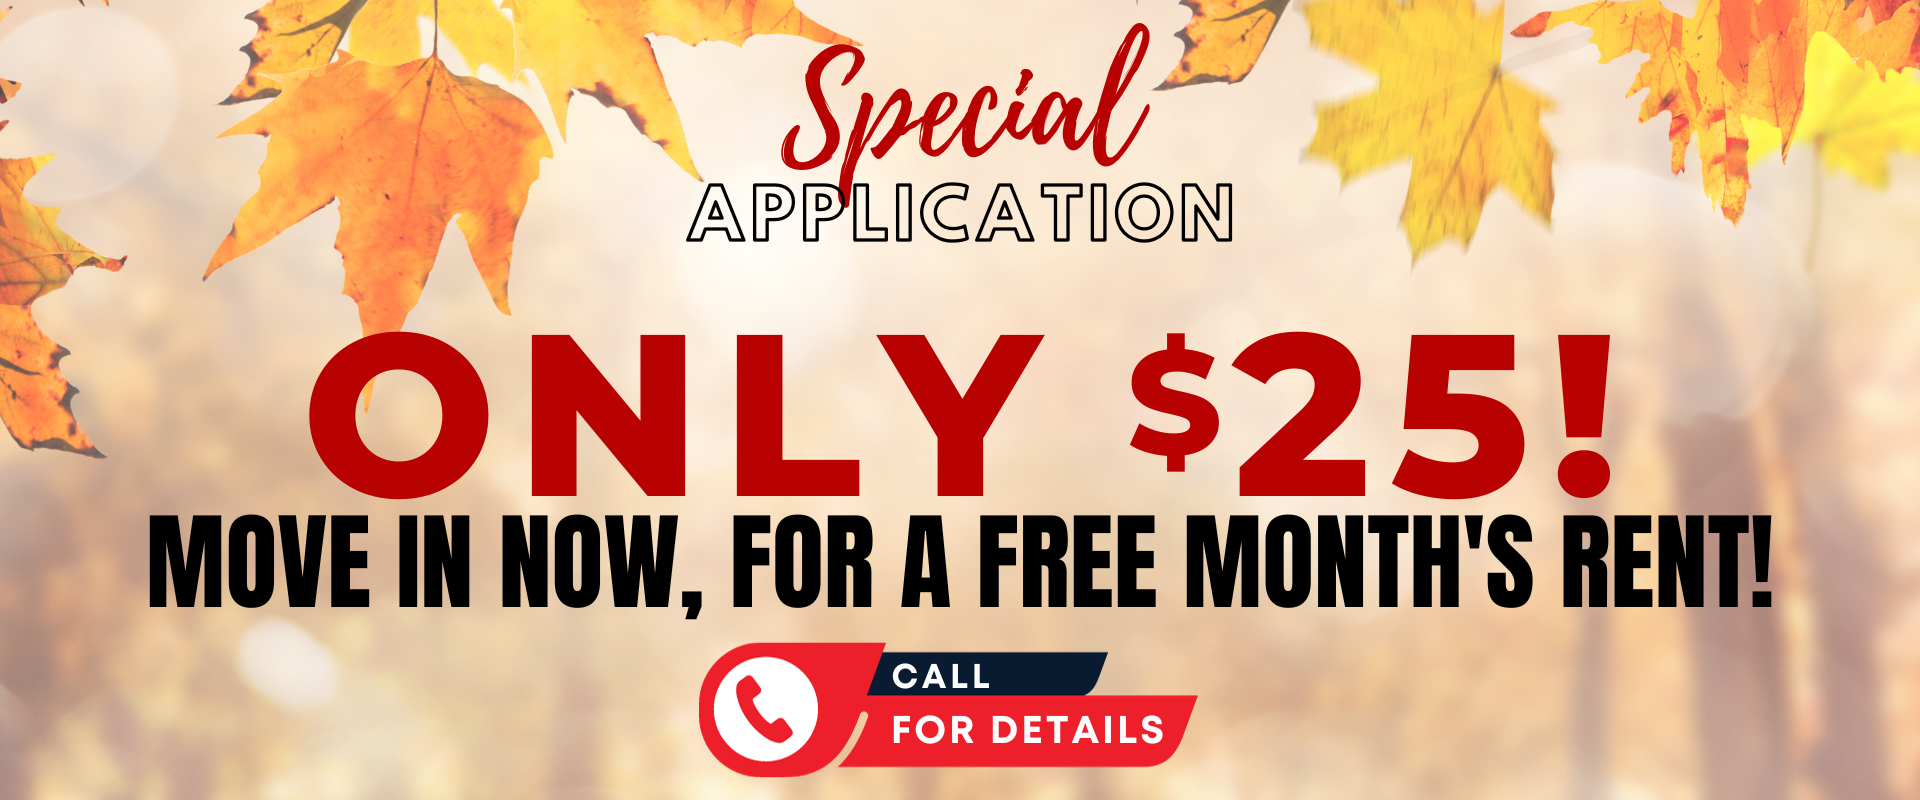 Limited-Time Offers for New Move-ins!*
$500 off 1st month rent!
Waived App fee after move-in
50% off hold/admin fee after move-in
*Contact us for more details!